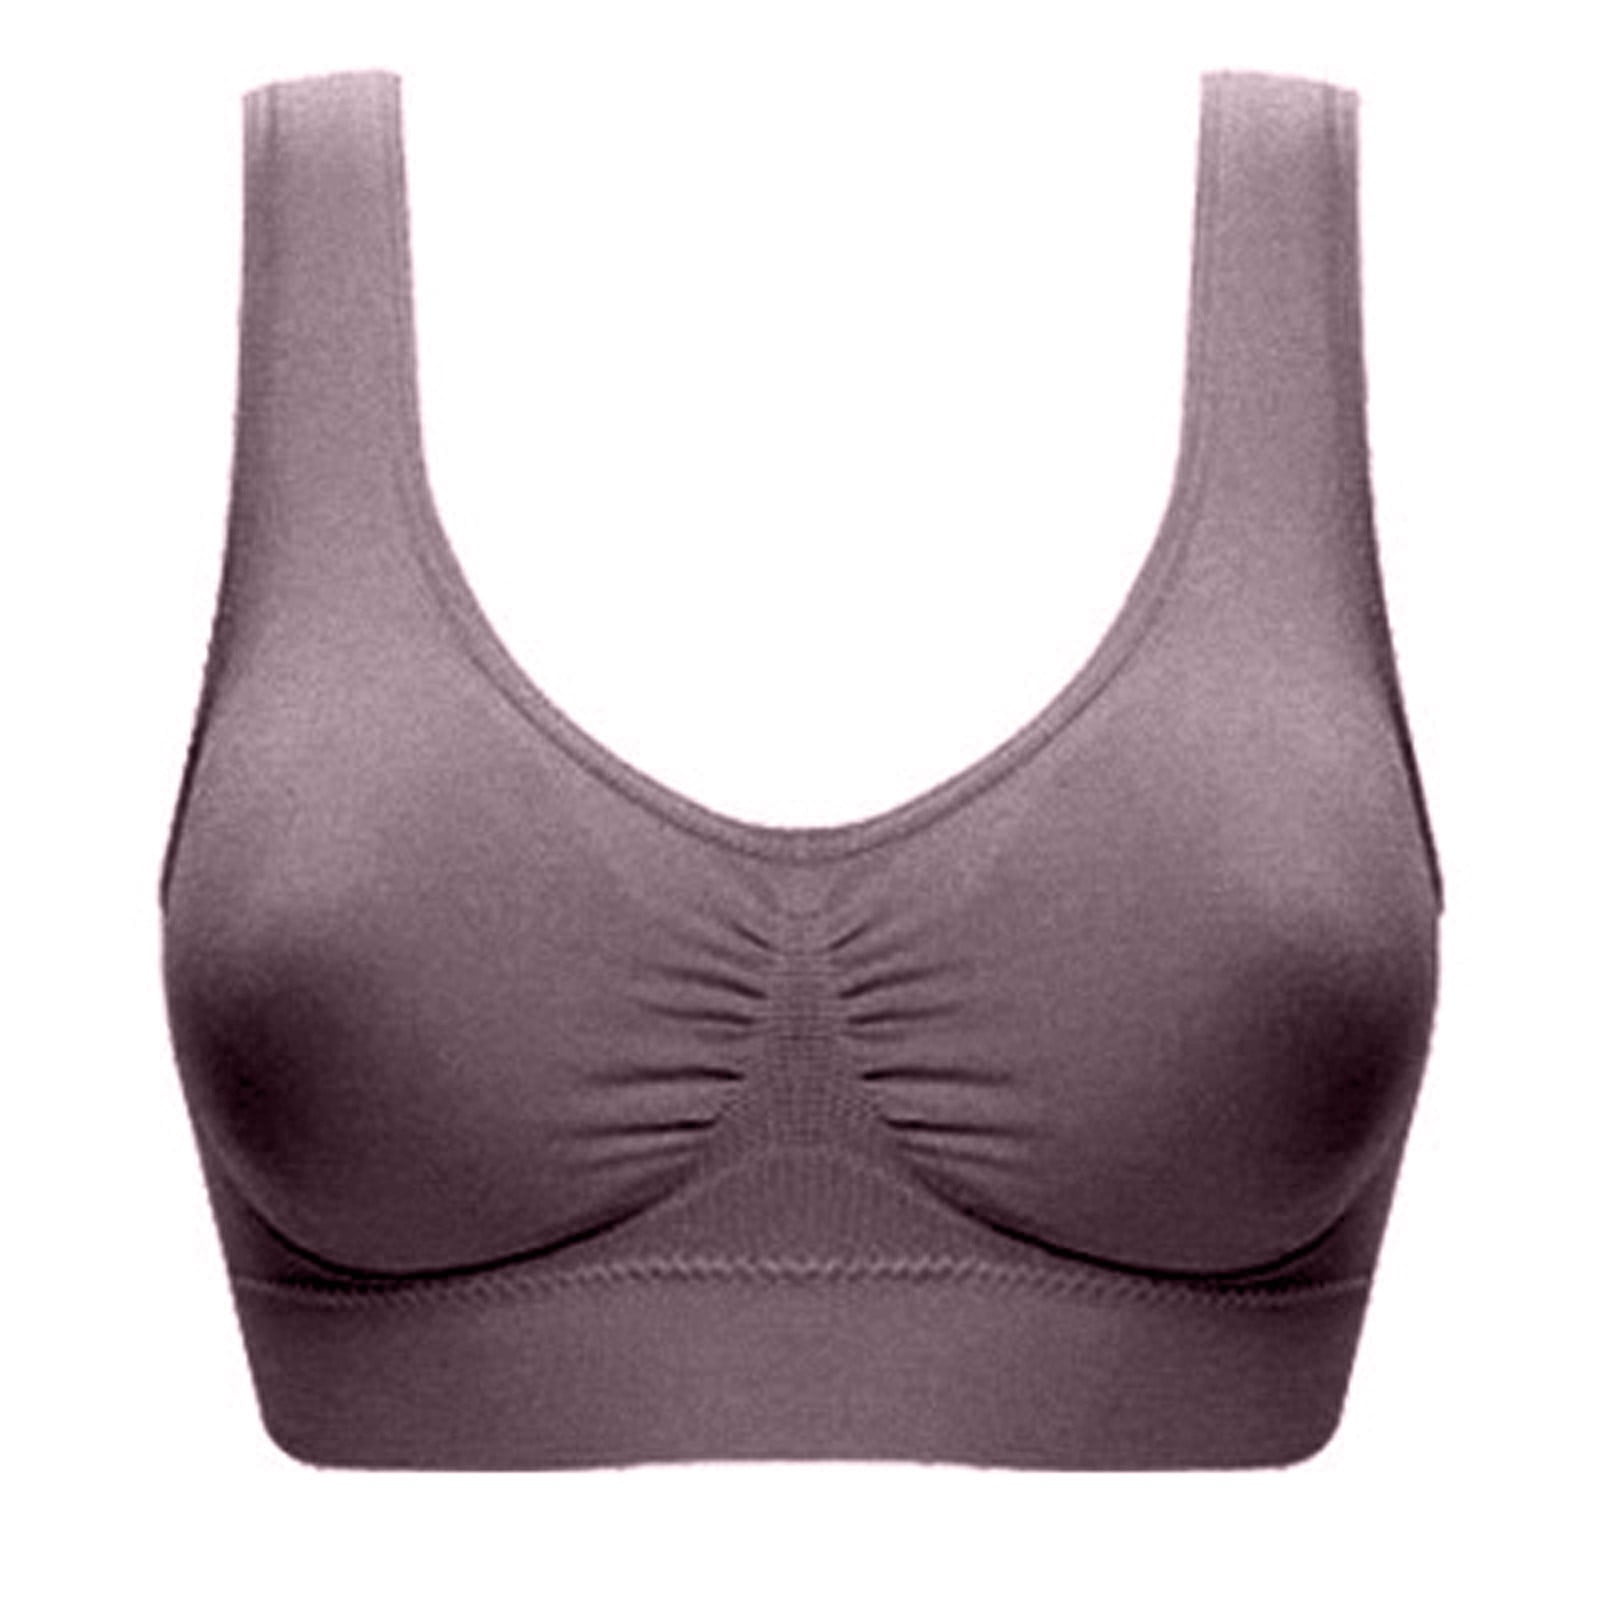 Woman Seamless Breathable Fitness Bra Wirefree Gathering Full Cup